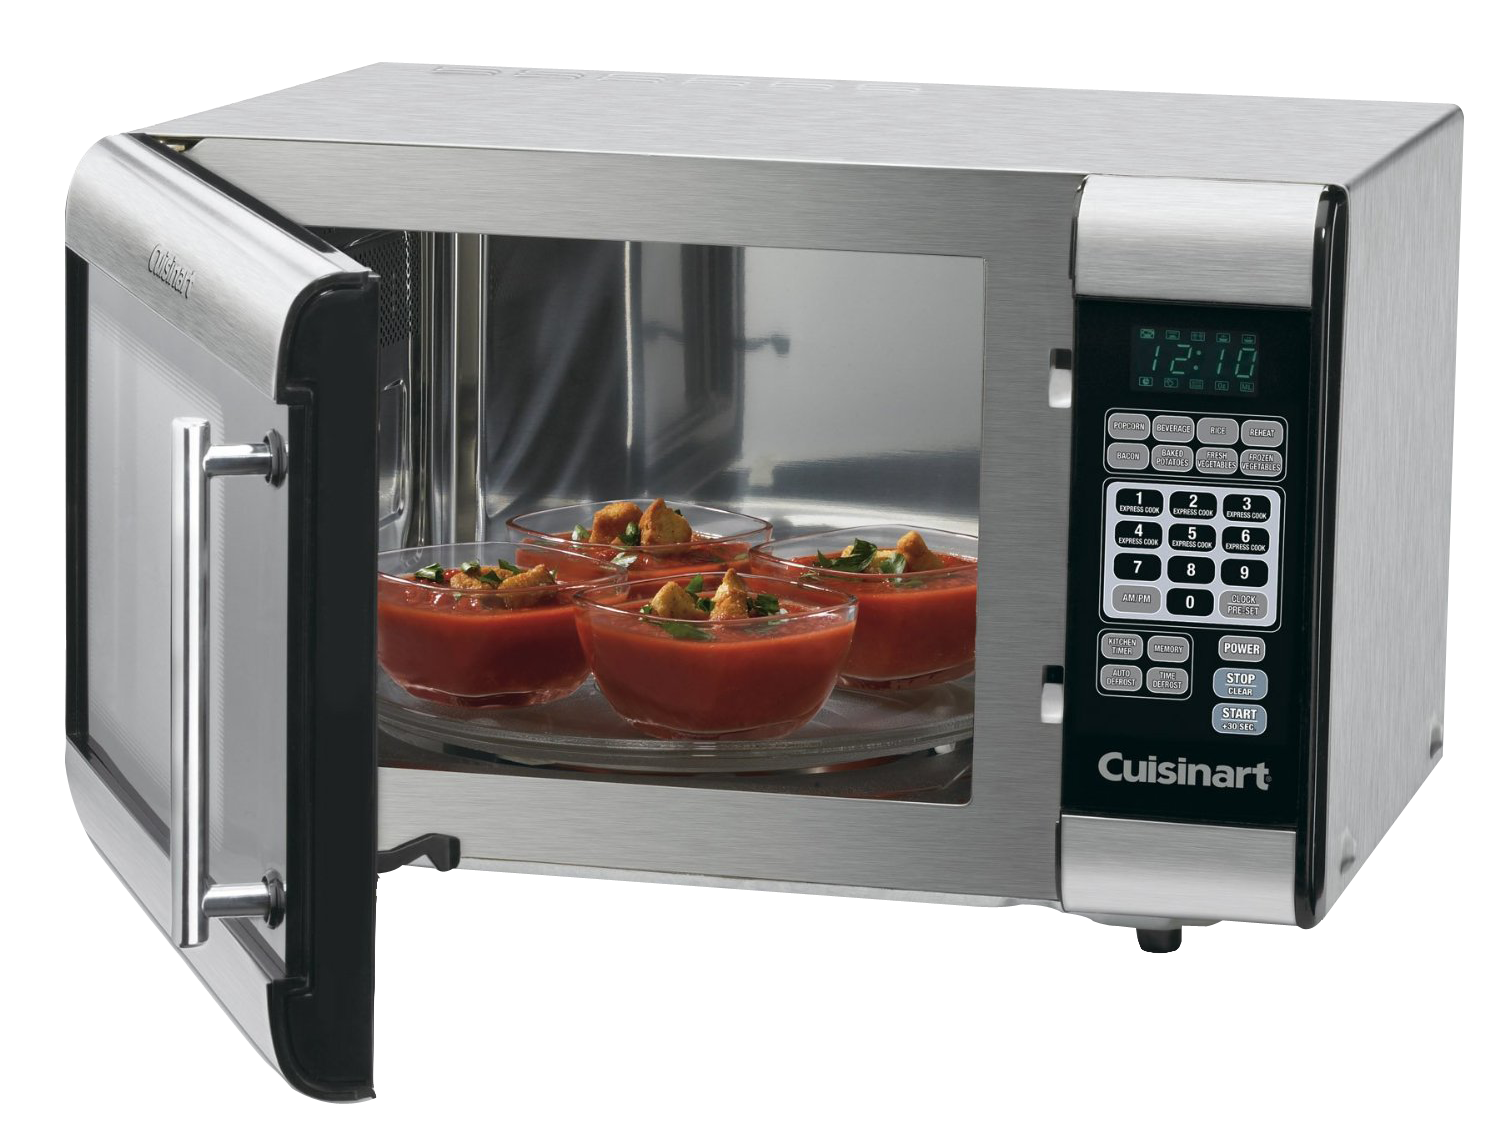 Microwave Oven PNG Photos